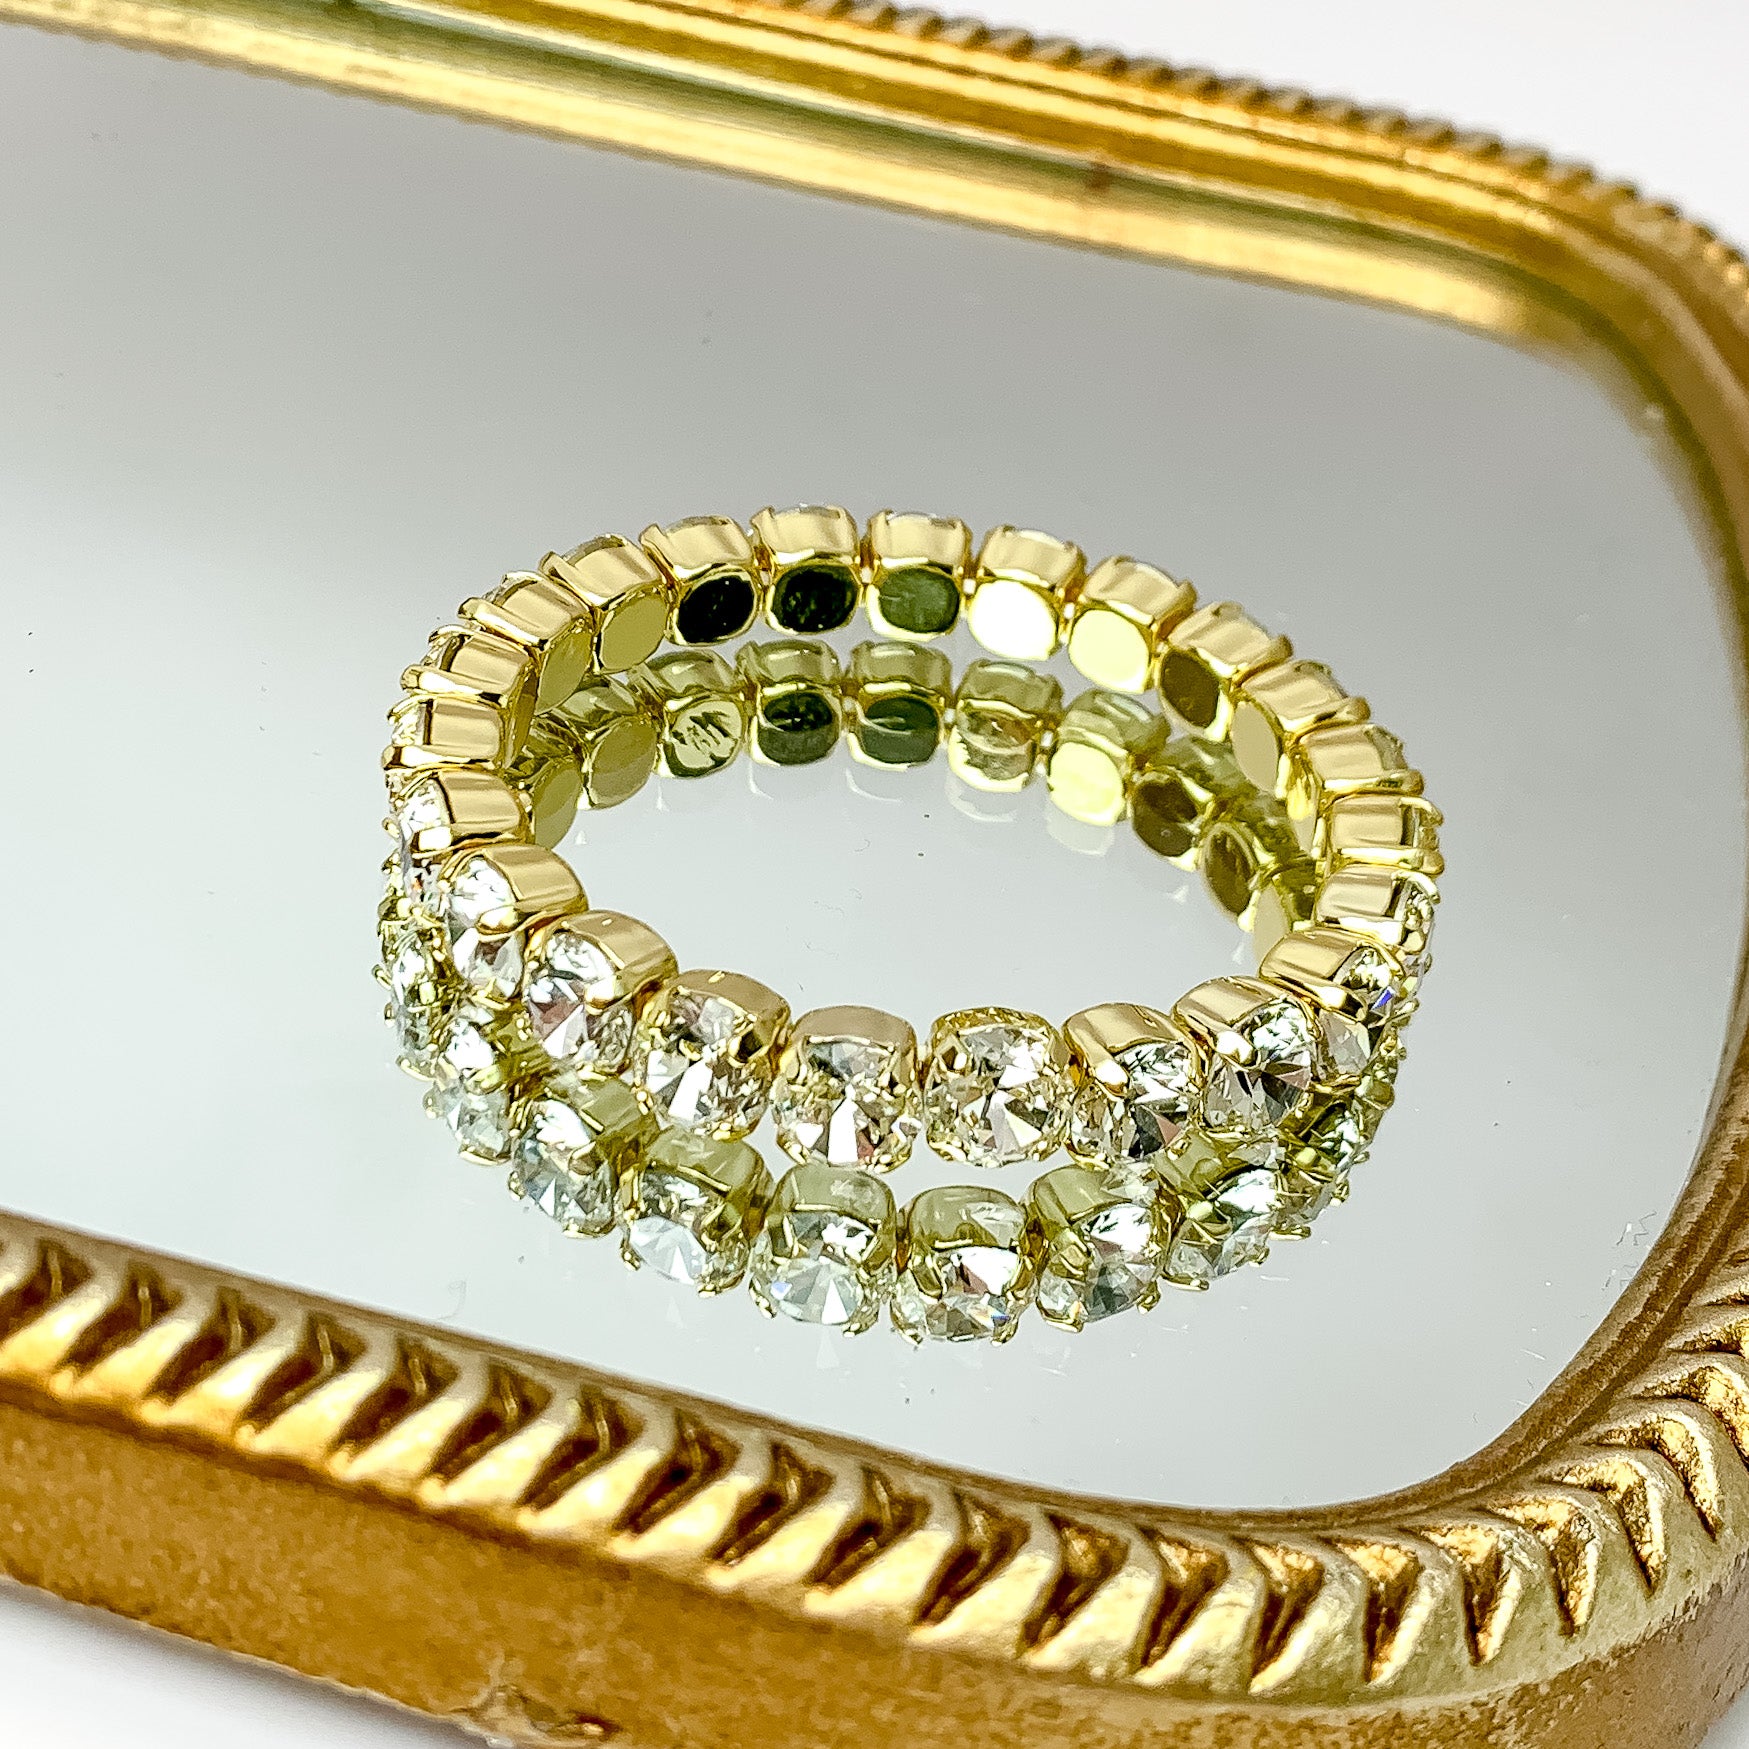 Single crystal layered bracelet stretchy to fit most wrists with gold undertones. Pictured on a mirror with a gold frame